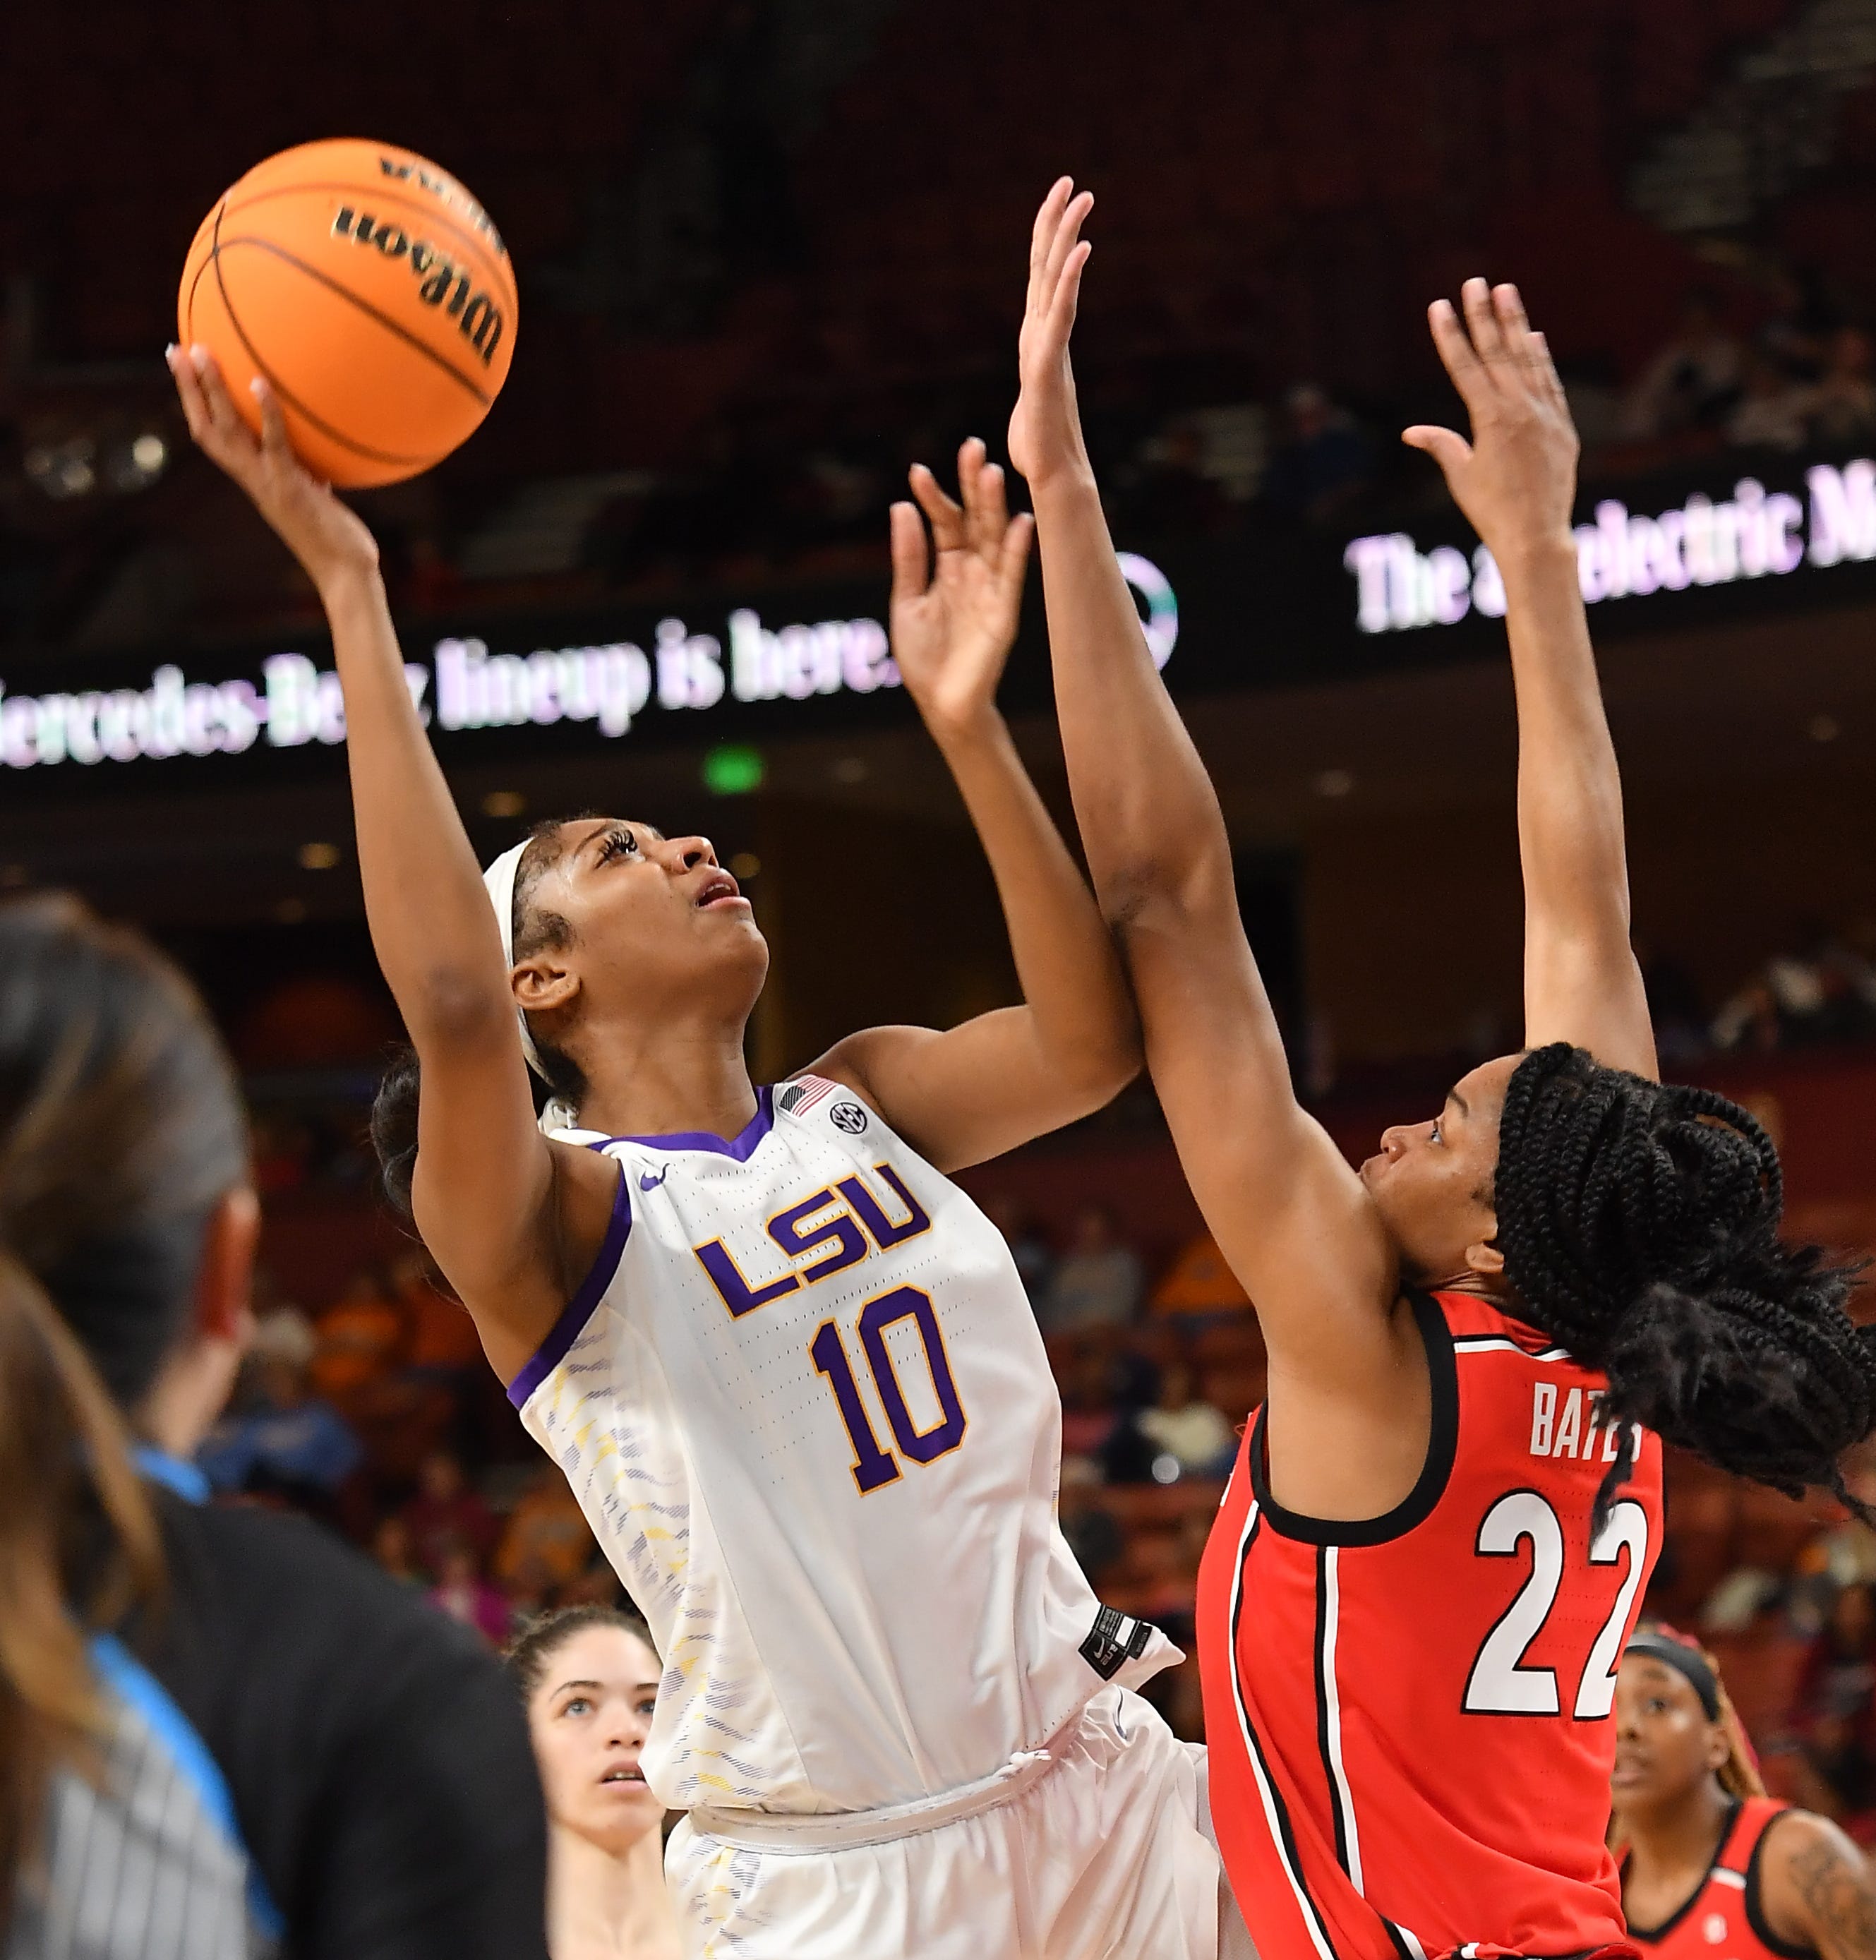 Georgia took on LSU in the SEC Women's Basketball Tournament  quarterfinals at the Bon Secours Wellness Arena in Greenville, S.C. Friday, March 3, 2023.  Louisiana State University forward Angel Reese (10) takes a shot as Georgia forward forward Malury Bates (22) defends.